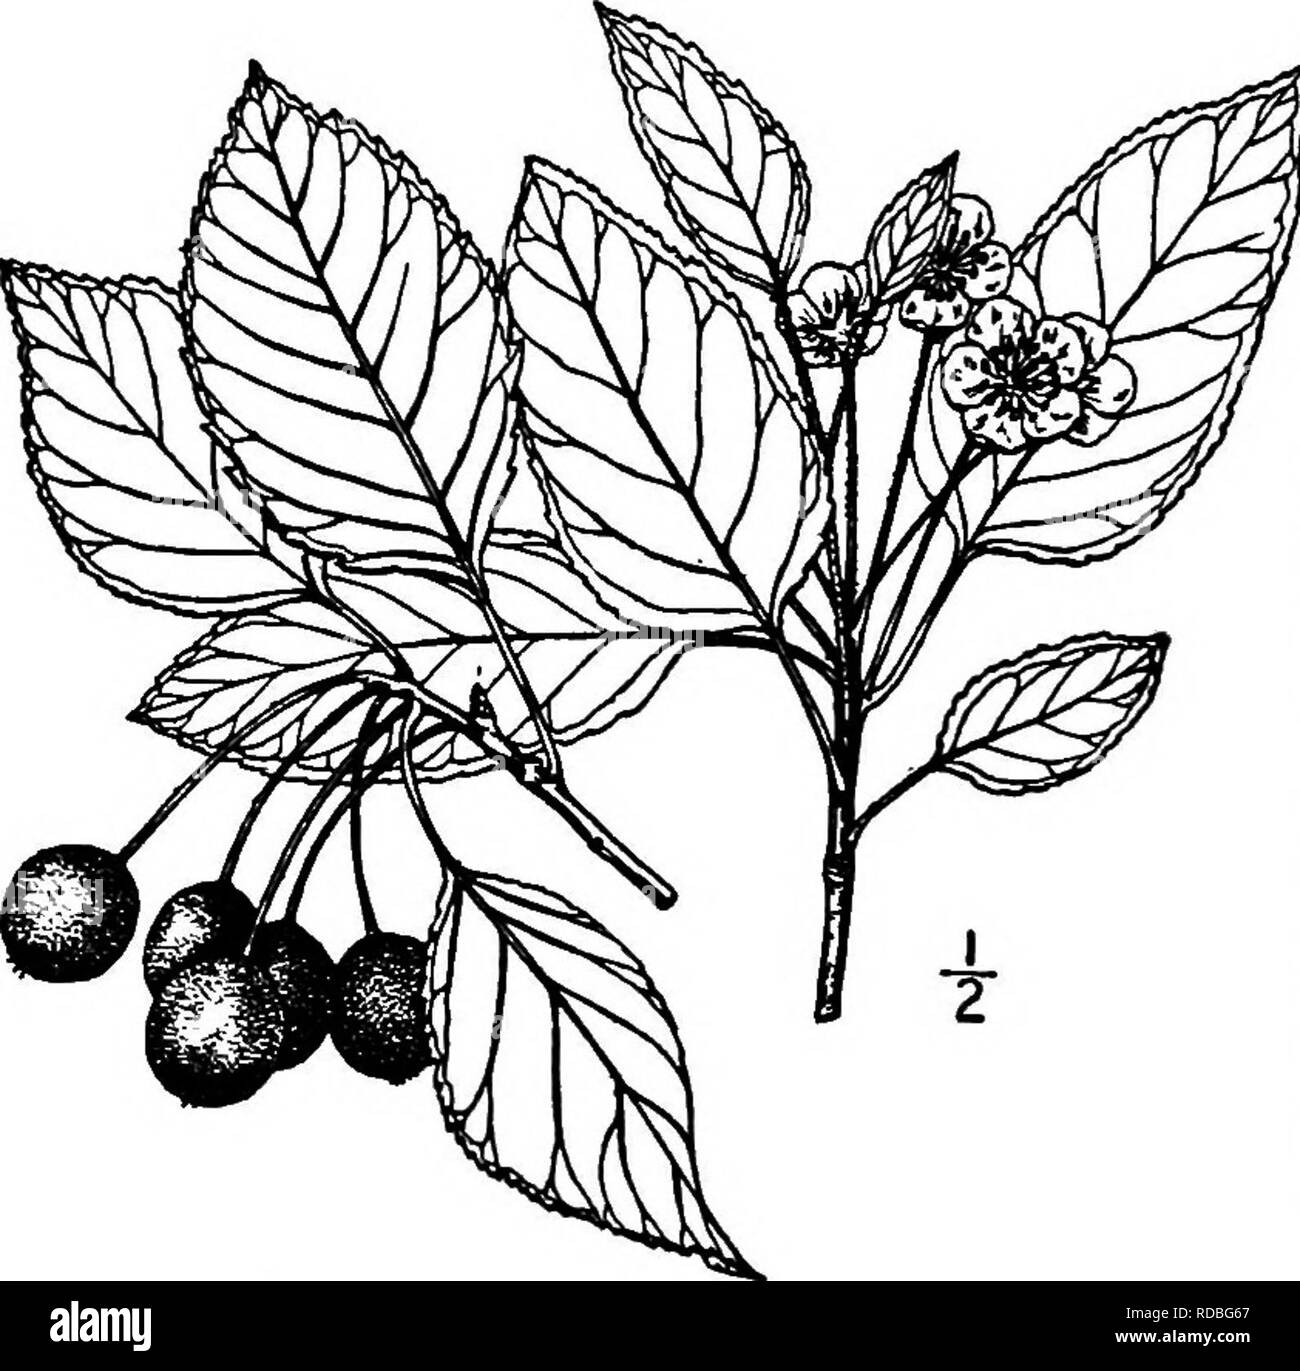 . North American trees : being descriptions and illustrations of the trees growing independently of cultivation in North America, north of Mexico and the West Indies . Trees. 436 The Serviceberries stout, hairy, 2.5 to 4 cm. long. The flowers are 15 mm. across, in short racemose leafy-based cymes, on slender, .hairy, glandular or smooth pedi- [cels; the calyx-tube is obconic, smooth or nearly so, the lobes are small, sharp-pointed, very woolly on the iimer surface, de- ciduous in fruit; the petals are obovate to orbicular, irregularly toothed or wavy margined; styles smooth. The fruit ripens f Stock Photo